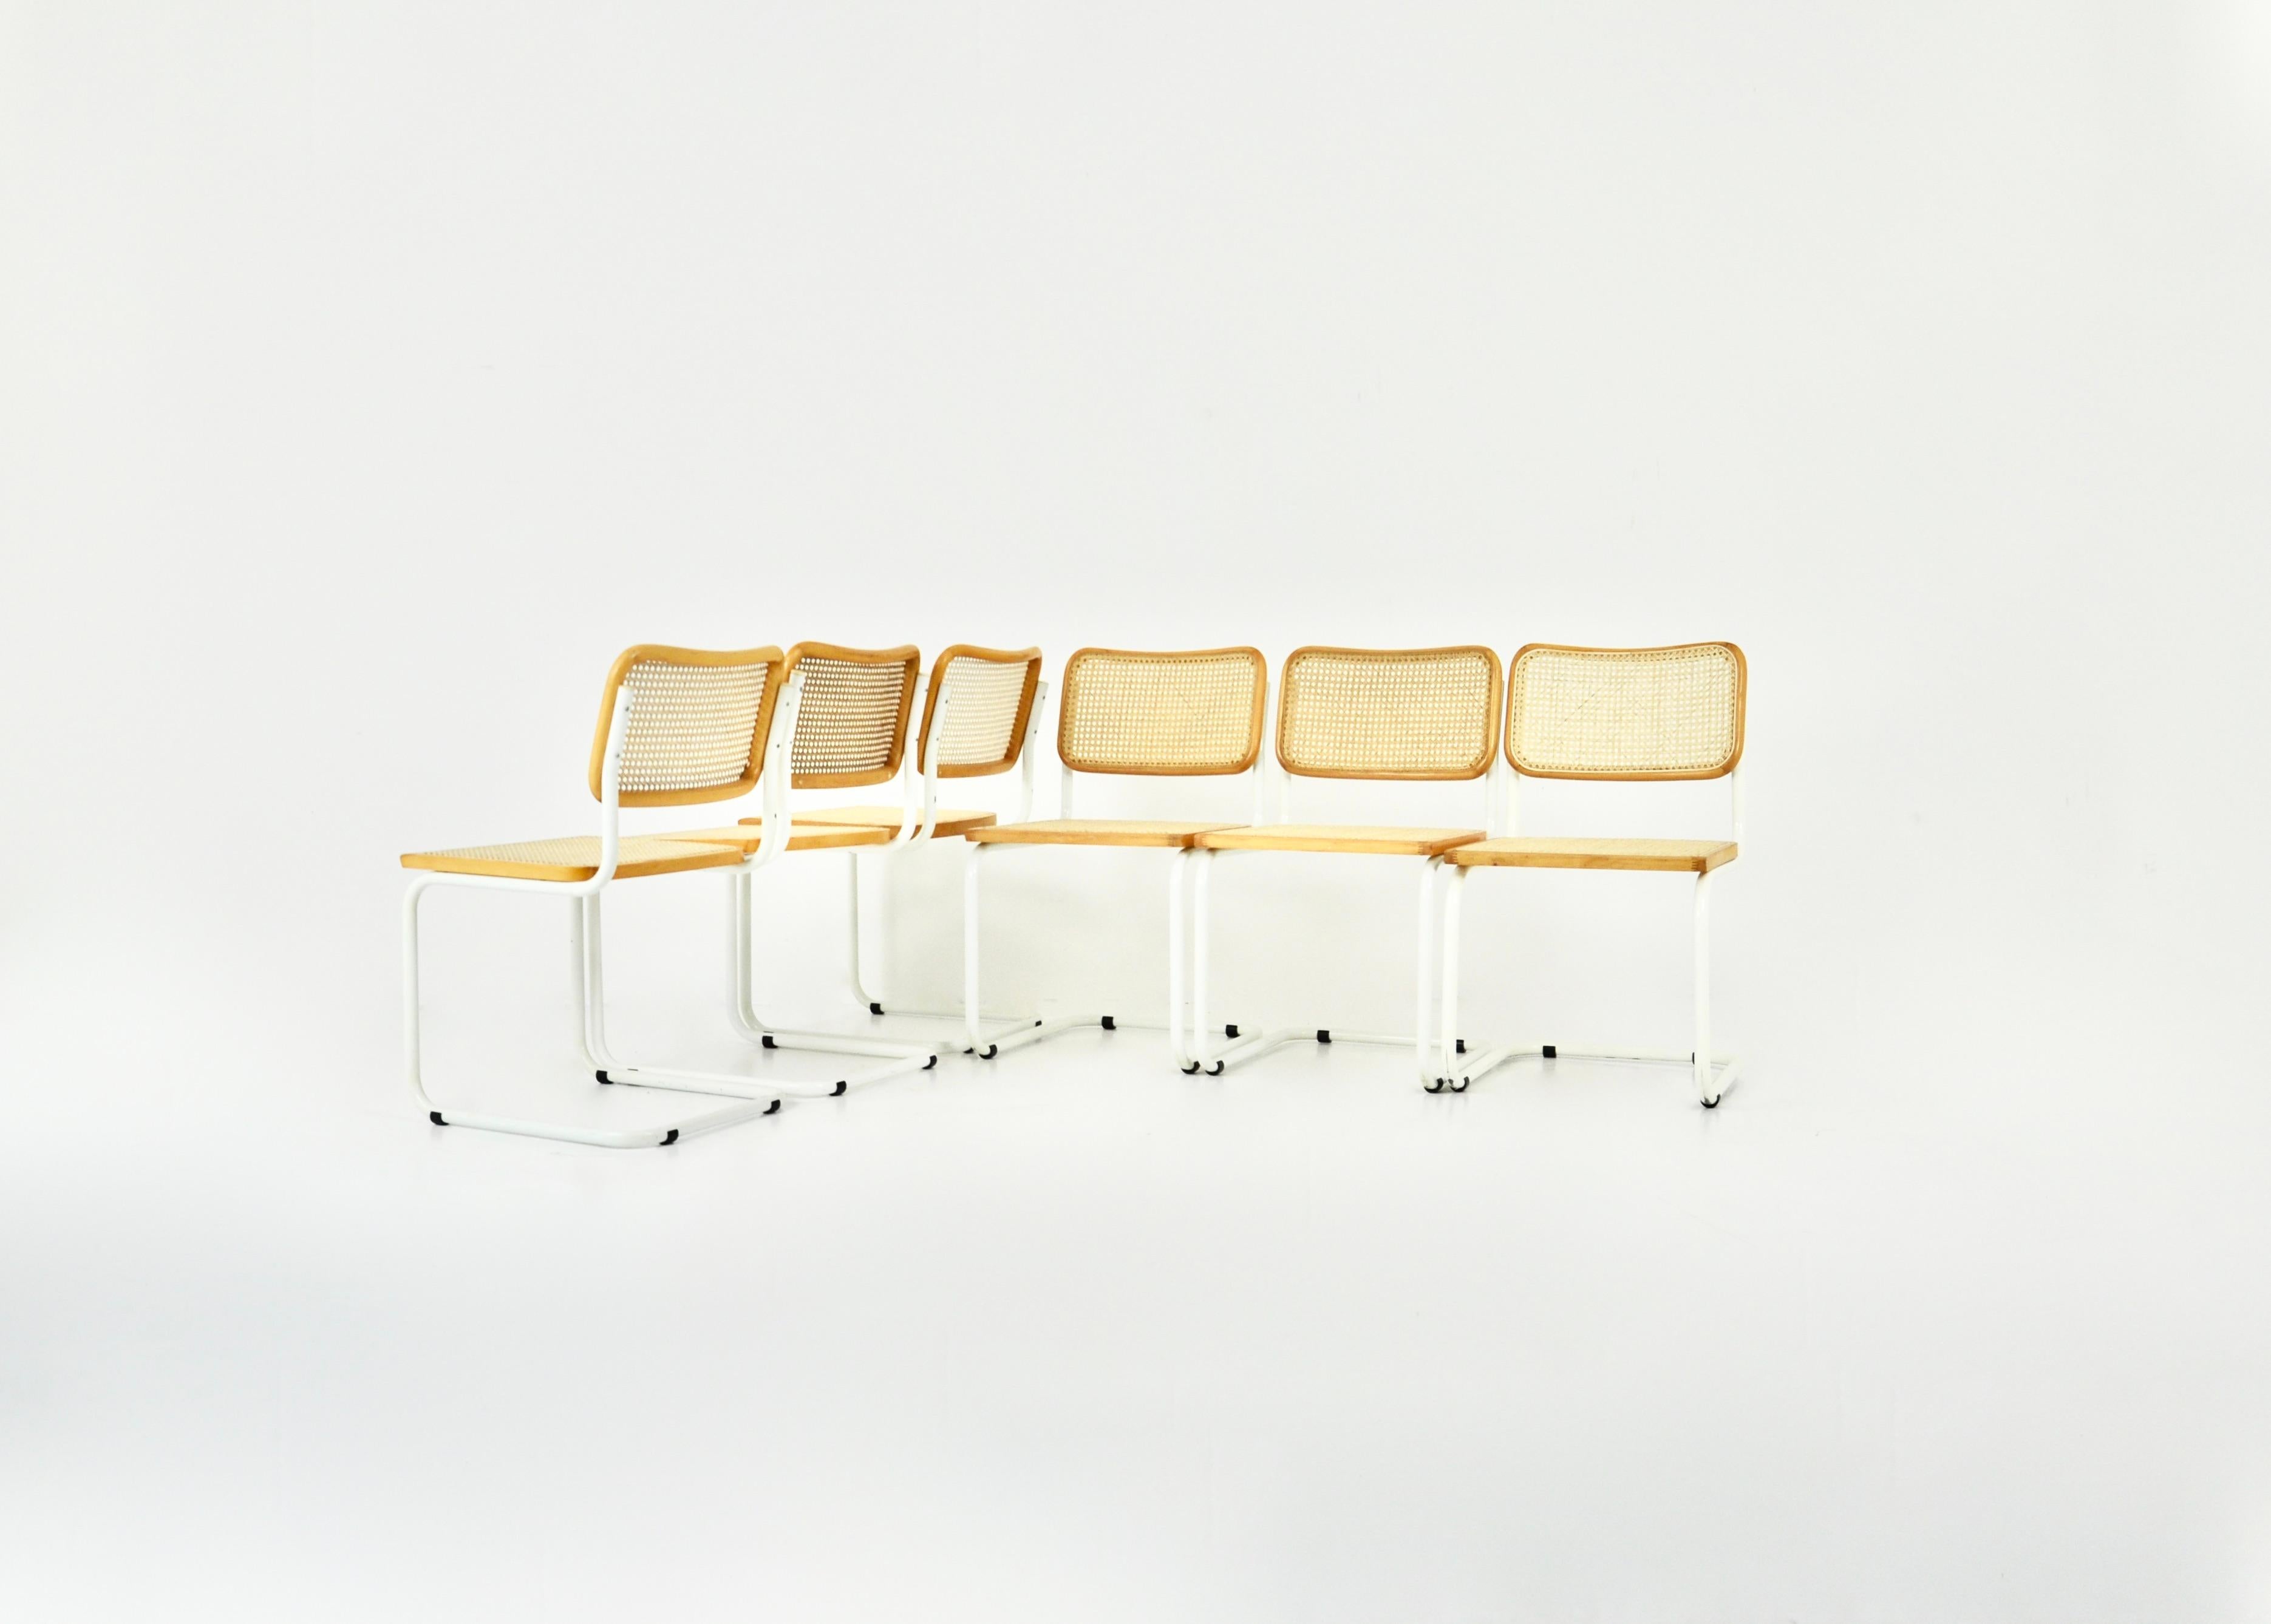 Set of 6 chairs in white metal, wood and cane. Wear due to time and age of the chairs. 
Dimensions: seat height: 45 cm.
Good condition
Wear due to the age of the chairs.